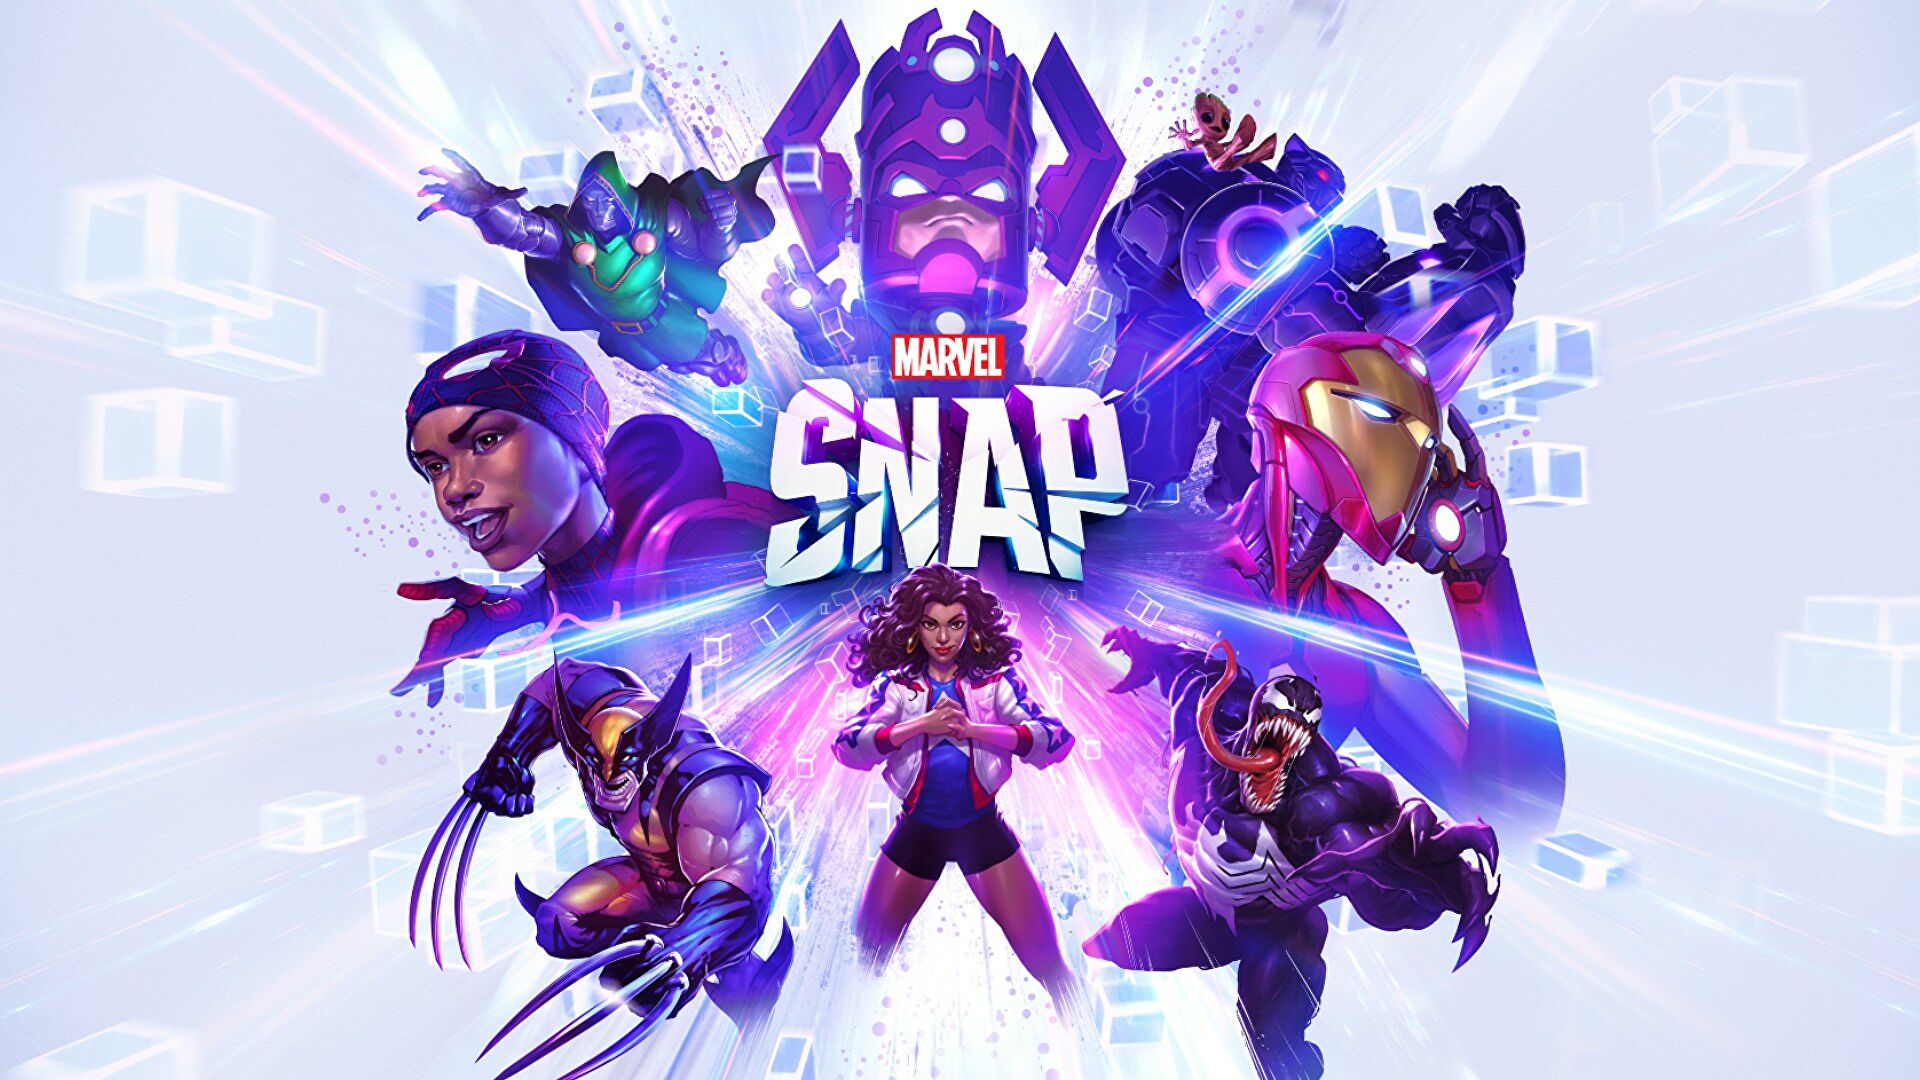 Marvel Snap will play its multiverse of superhero cards this October